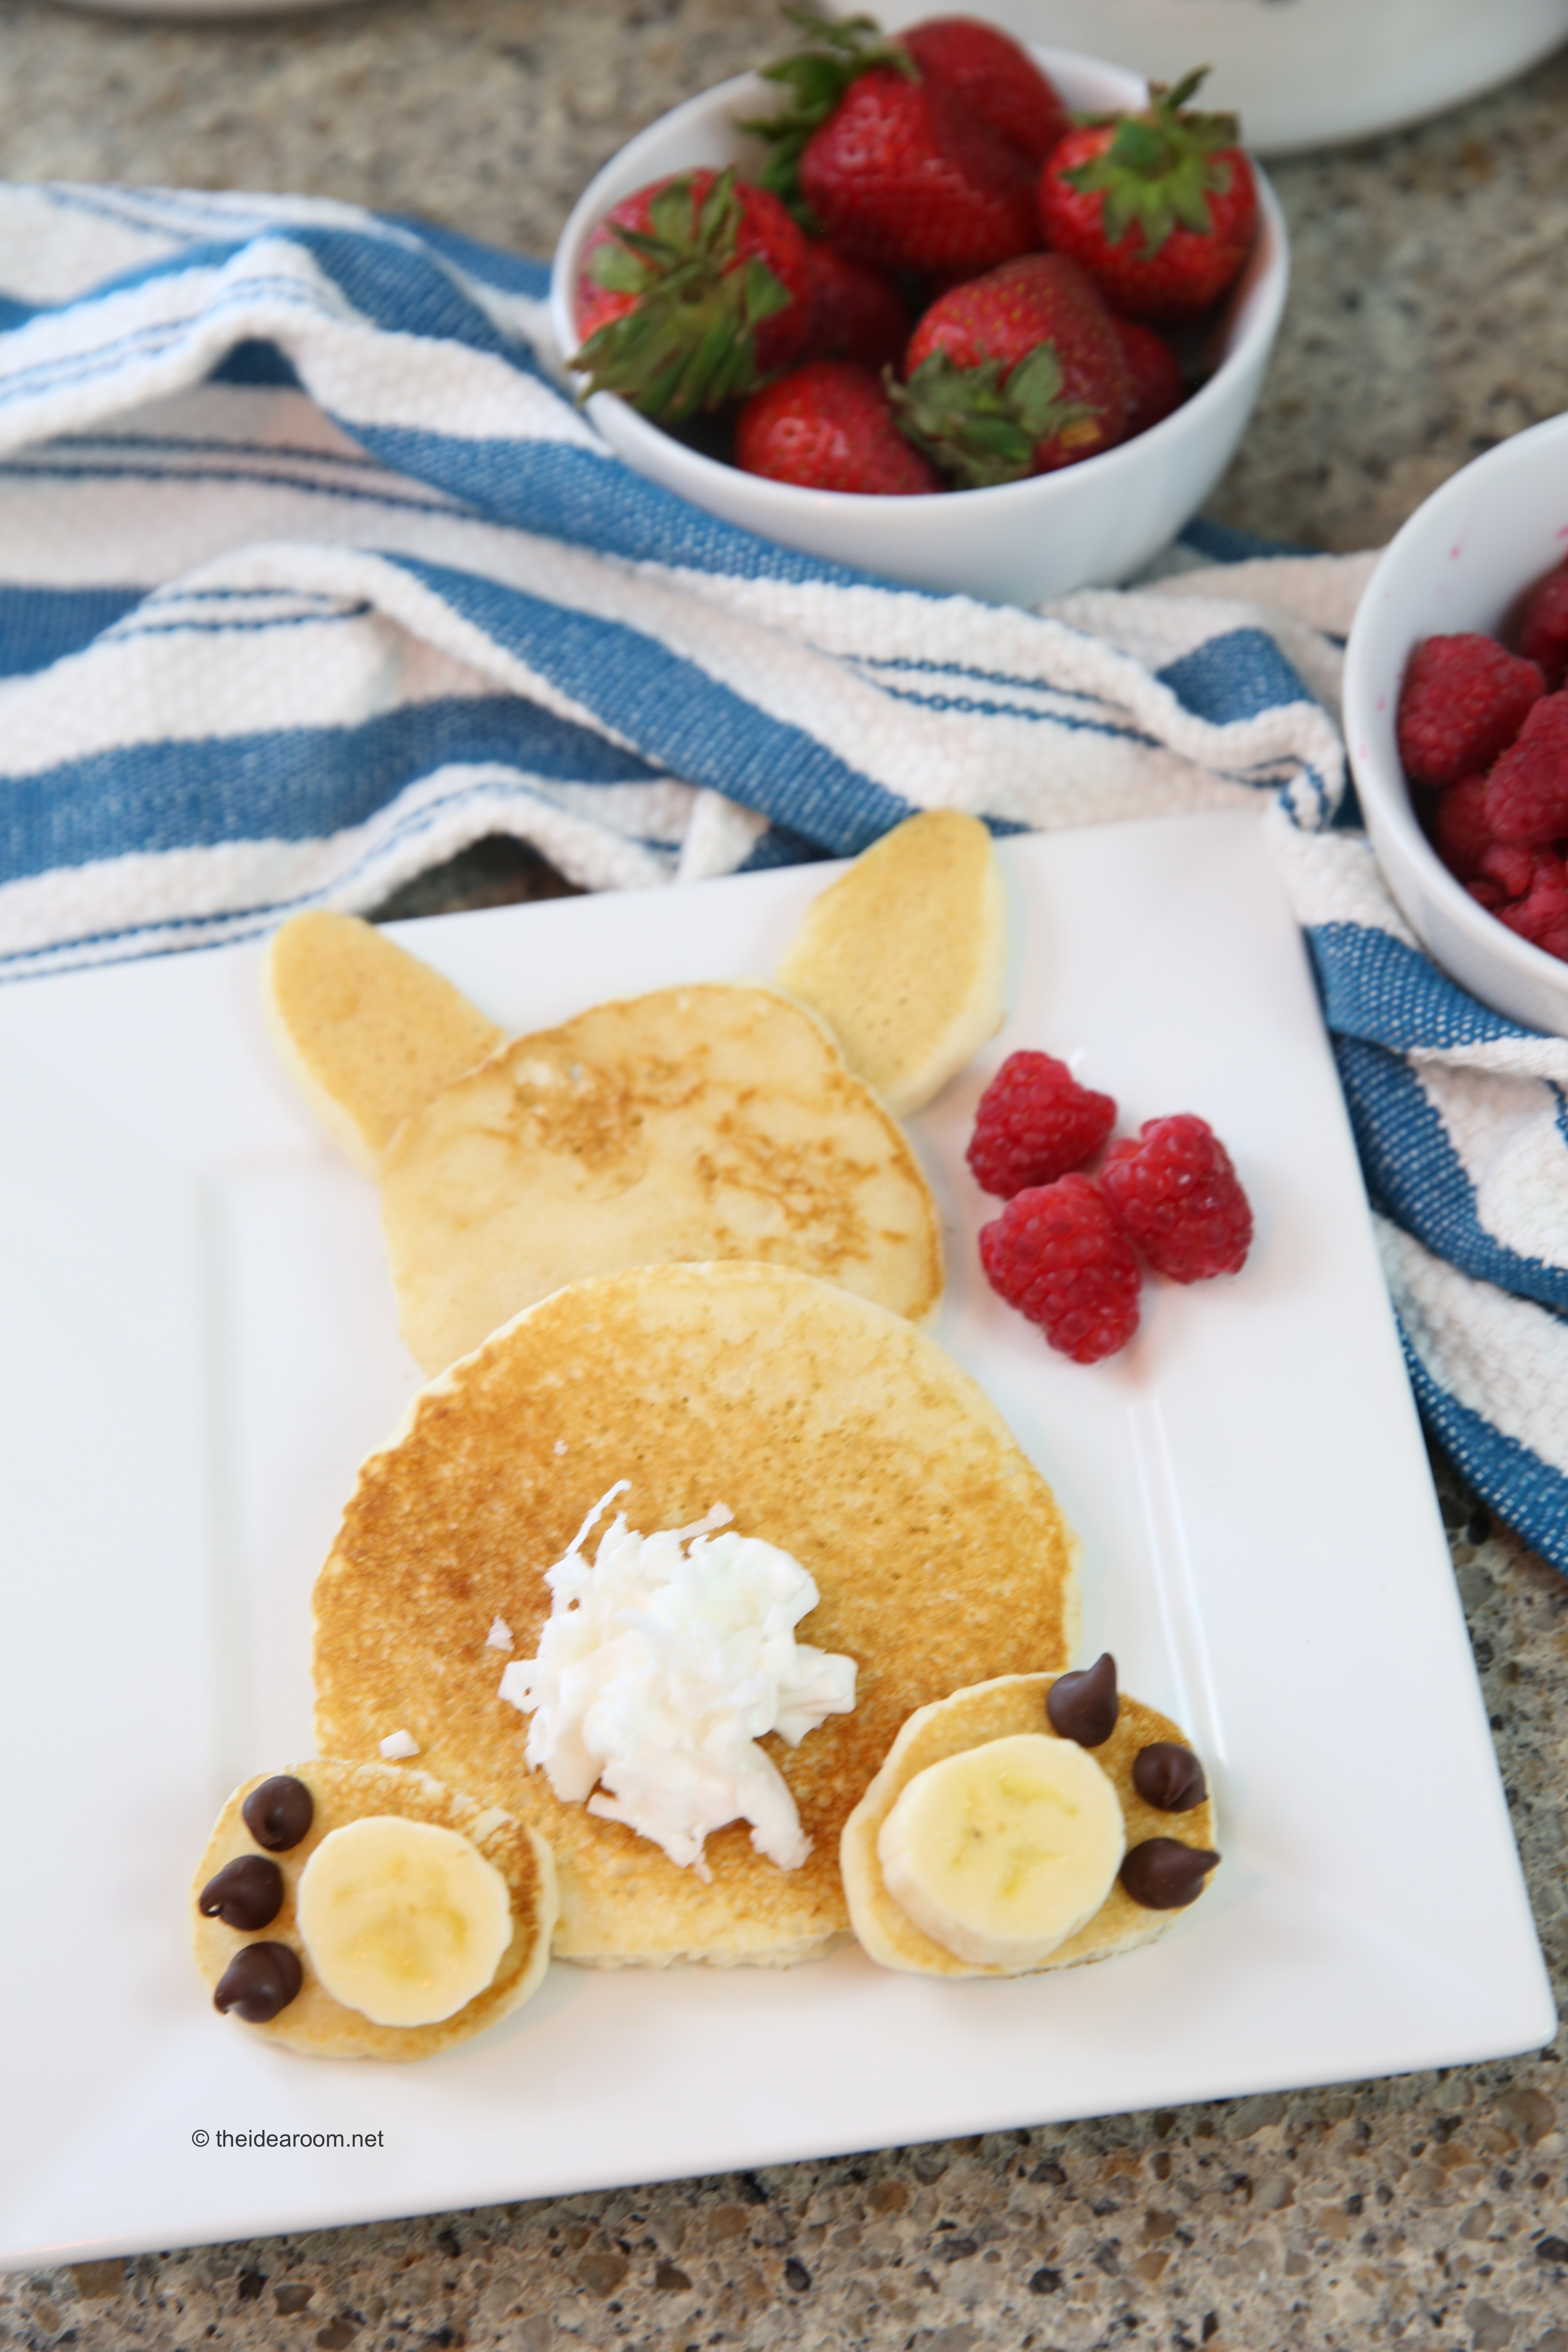 How to Make Easter Bunny Pancakes Video Tutorial